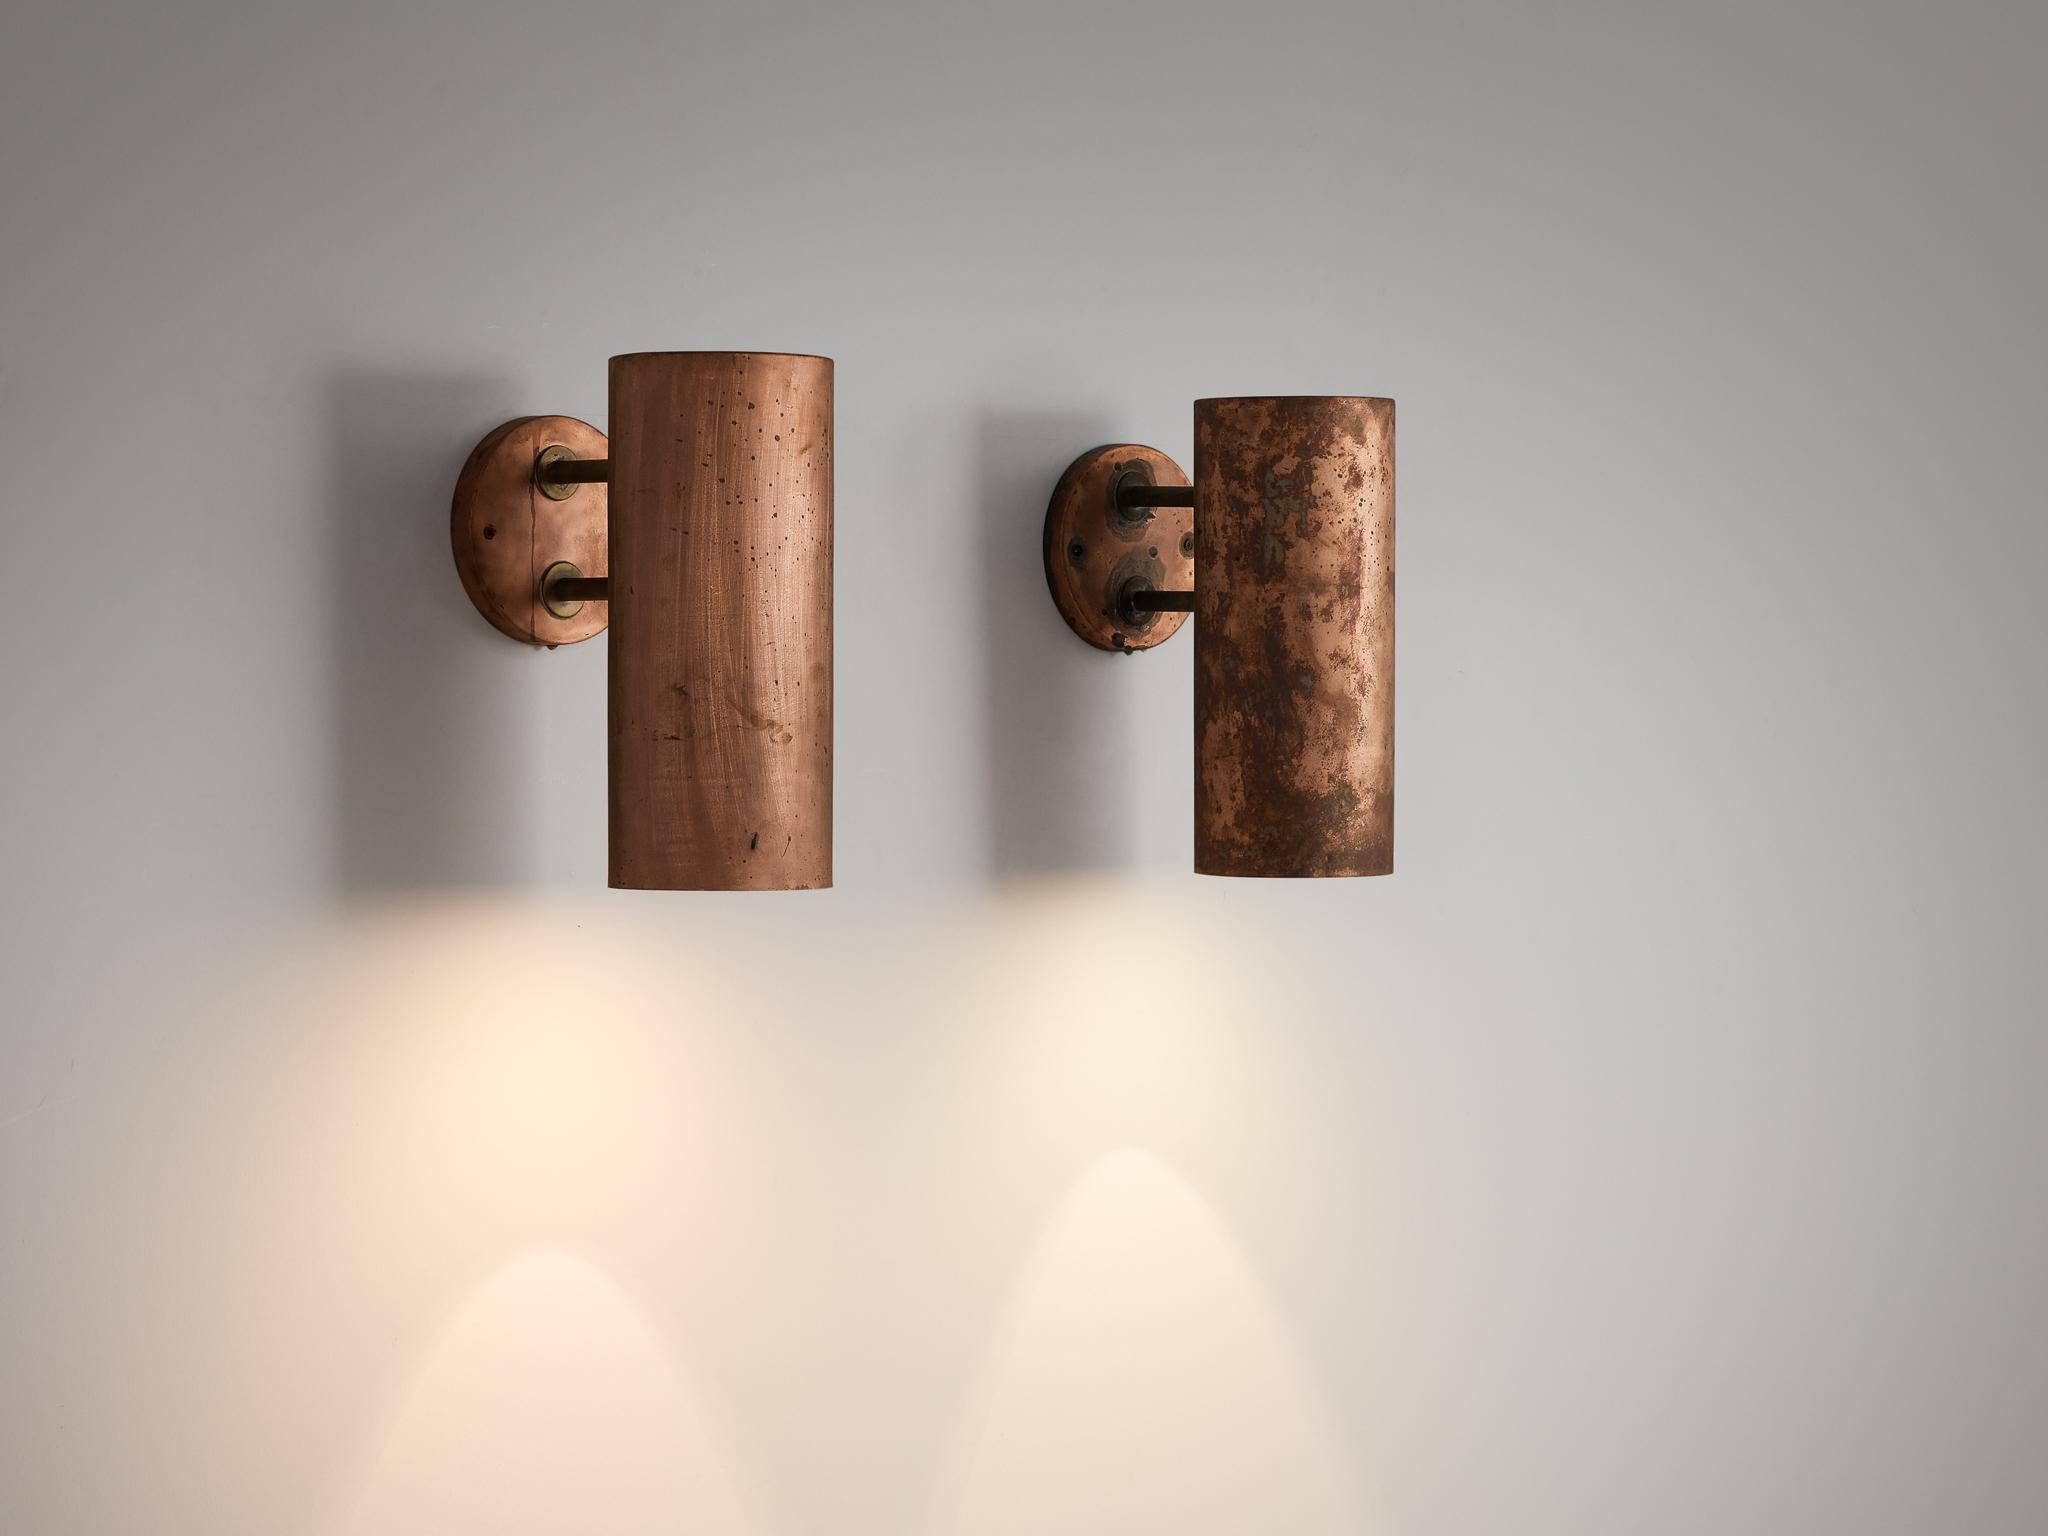 Hans-Agne Jakobsson ‘Rulle’ Wall Lights in Patinated Copper 1